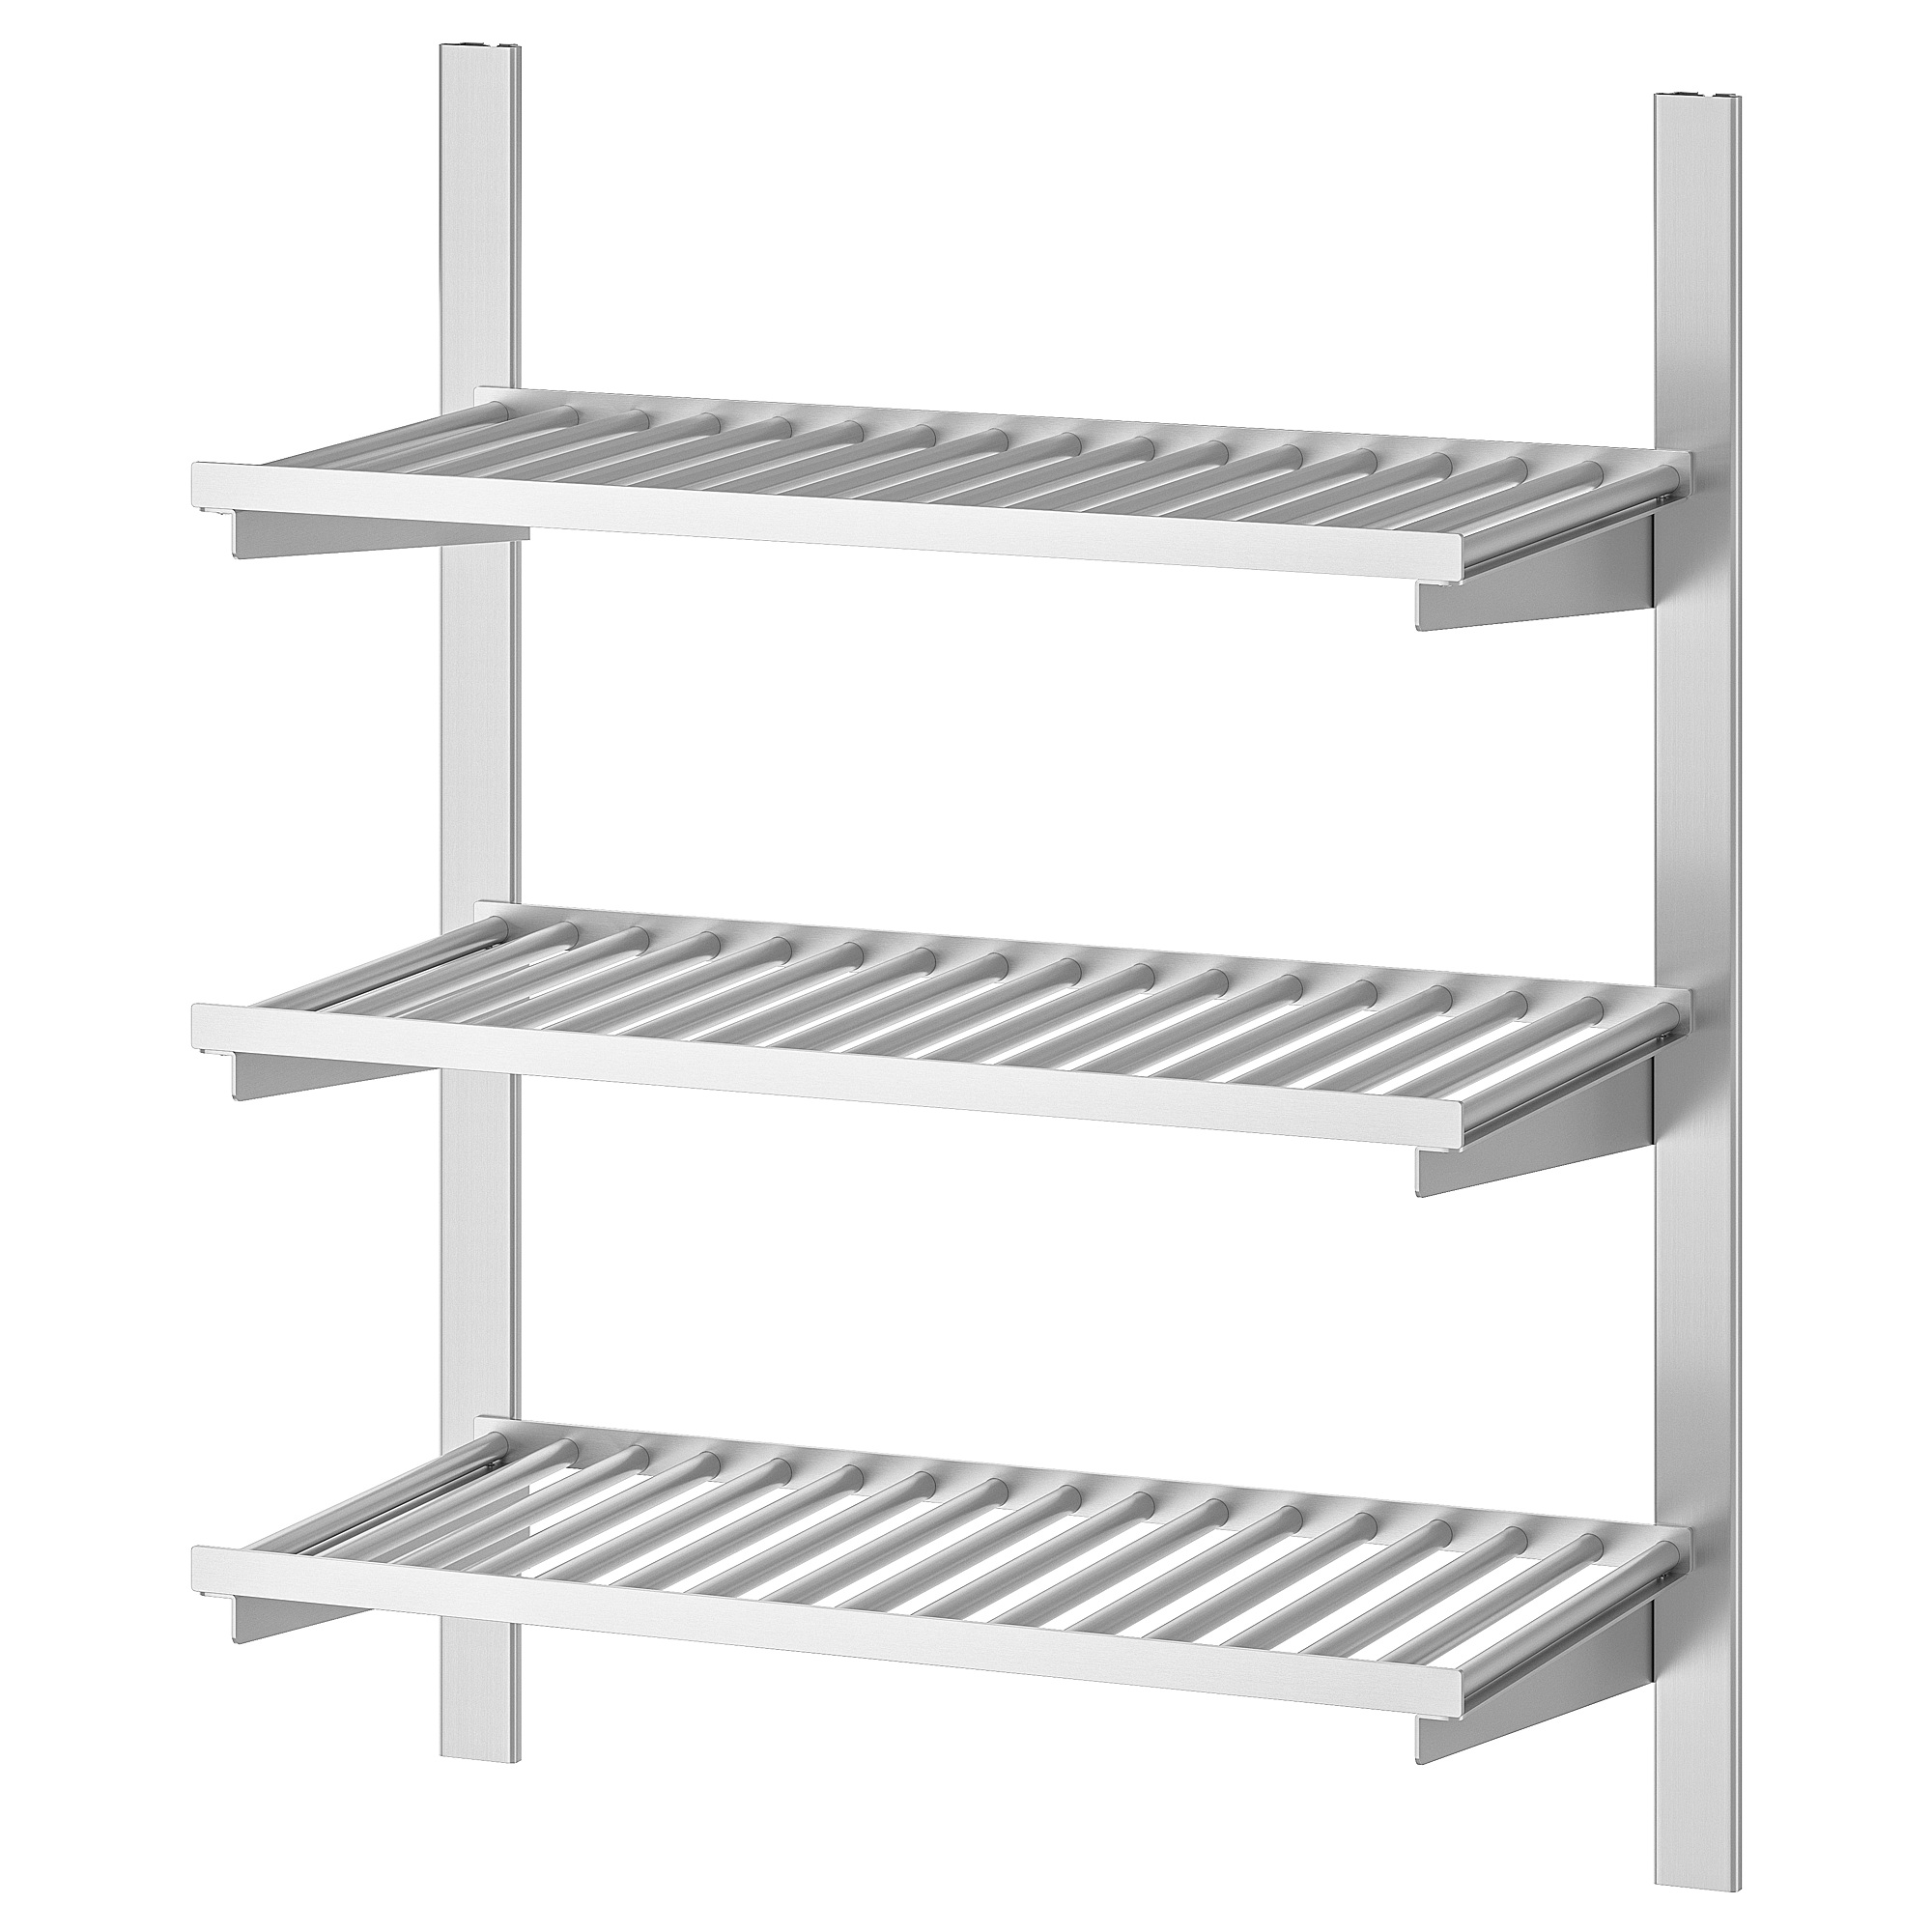 KUNGSFORS suspension rail with shelves